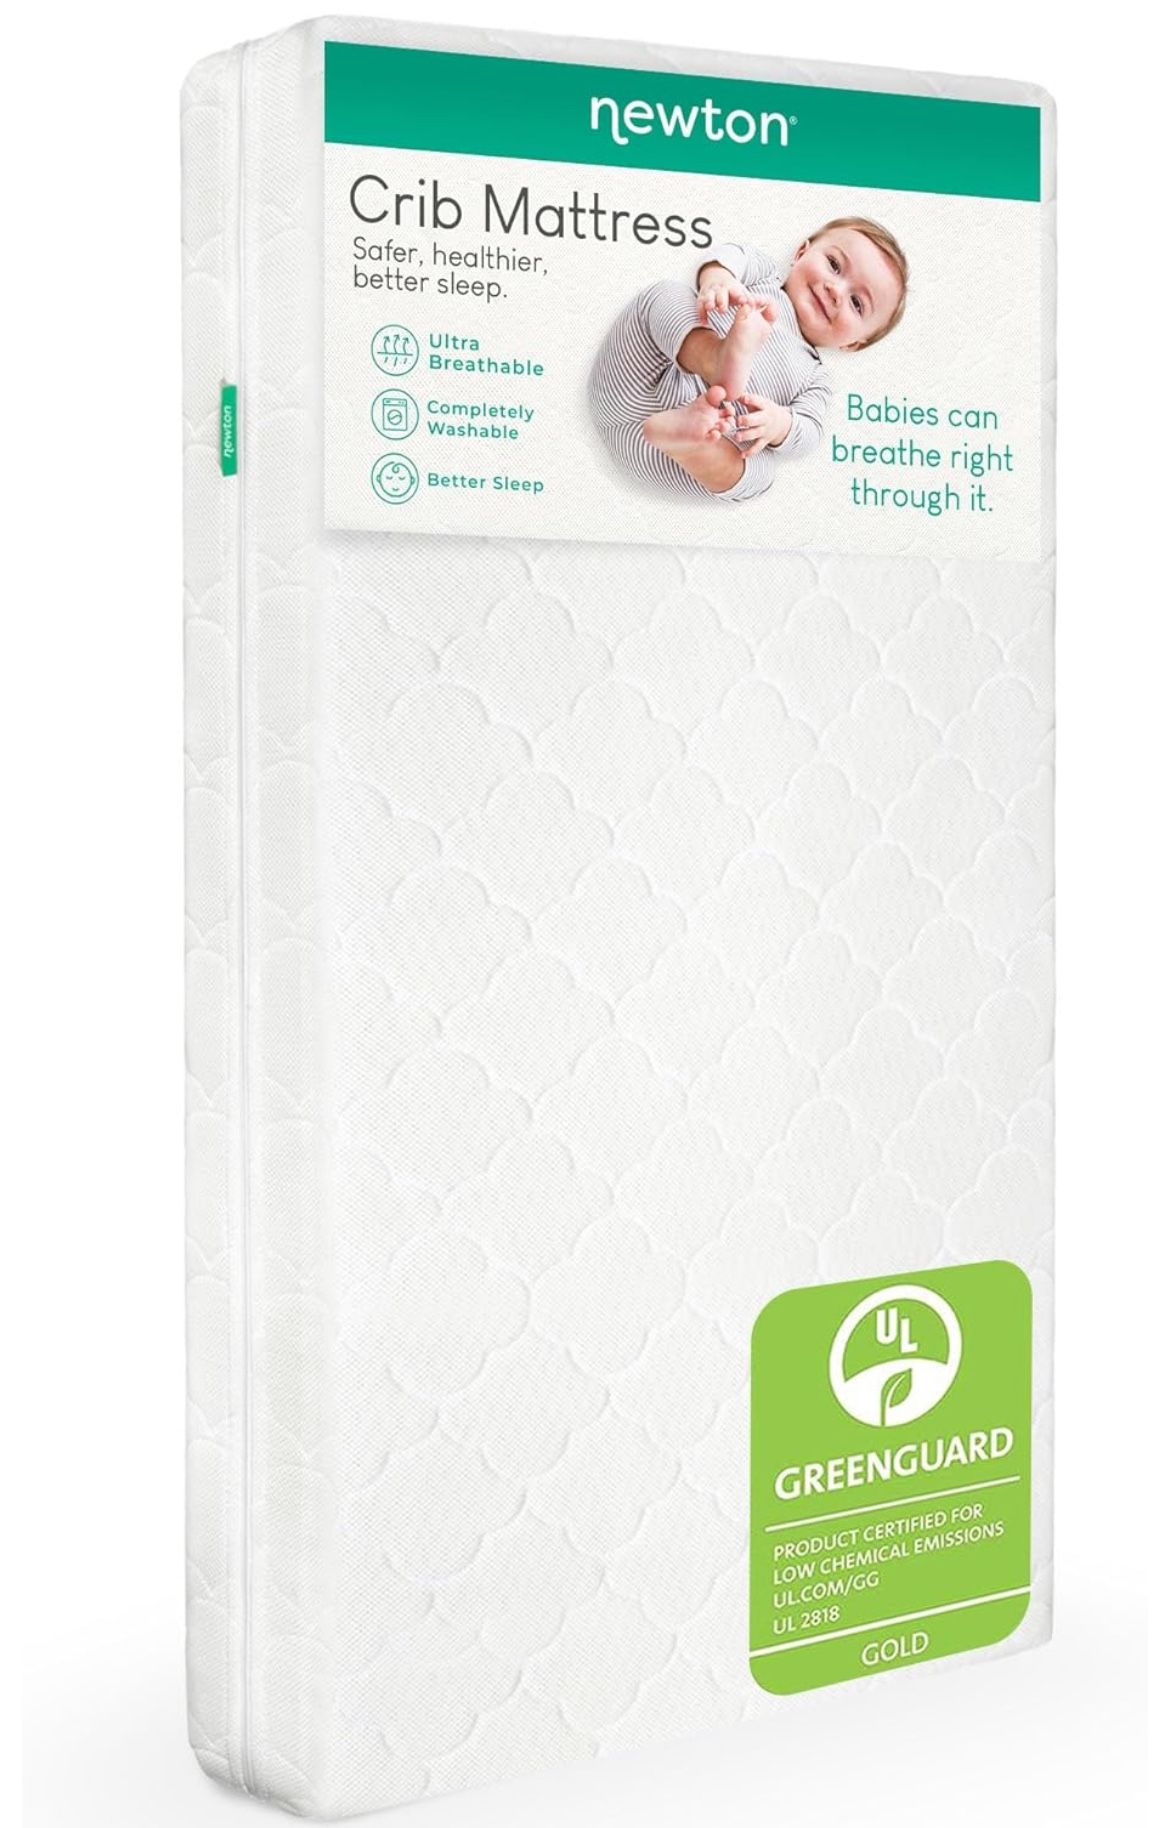 100% breathable and washable Newton Baby Crib Mattress and Toddler Bed